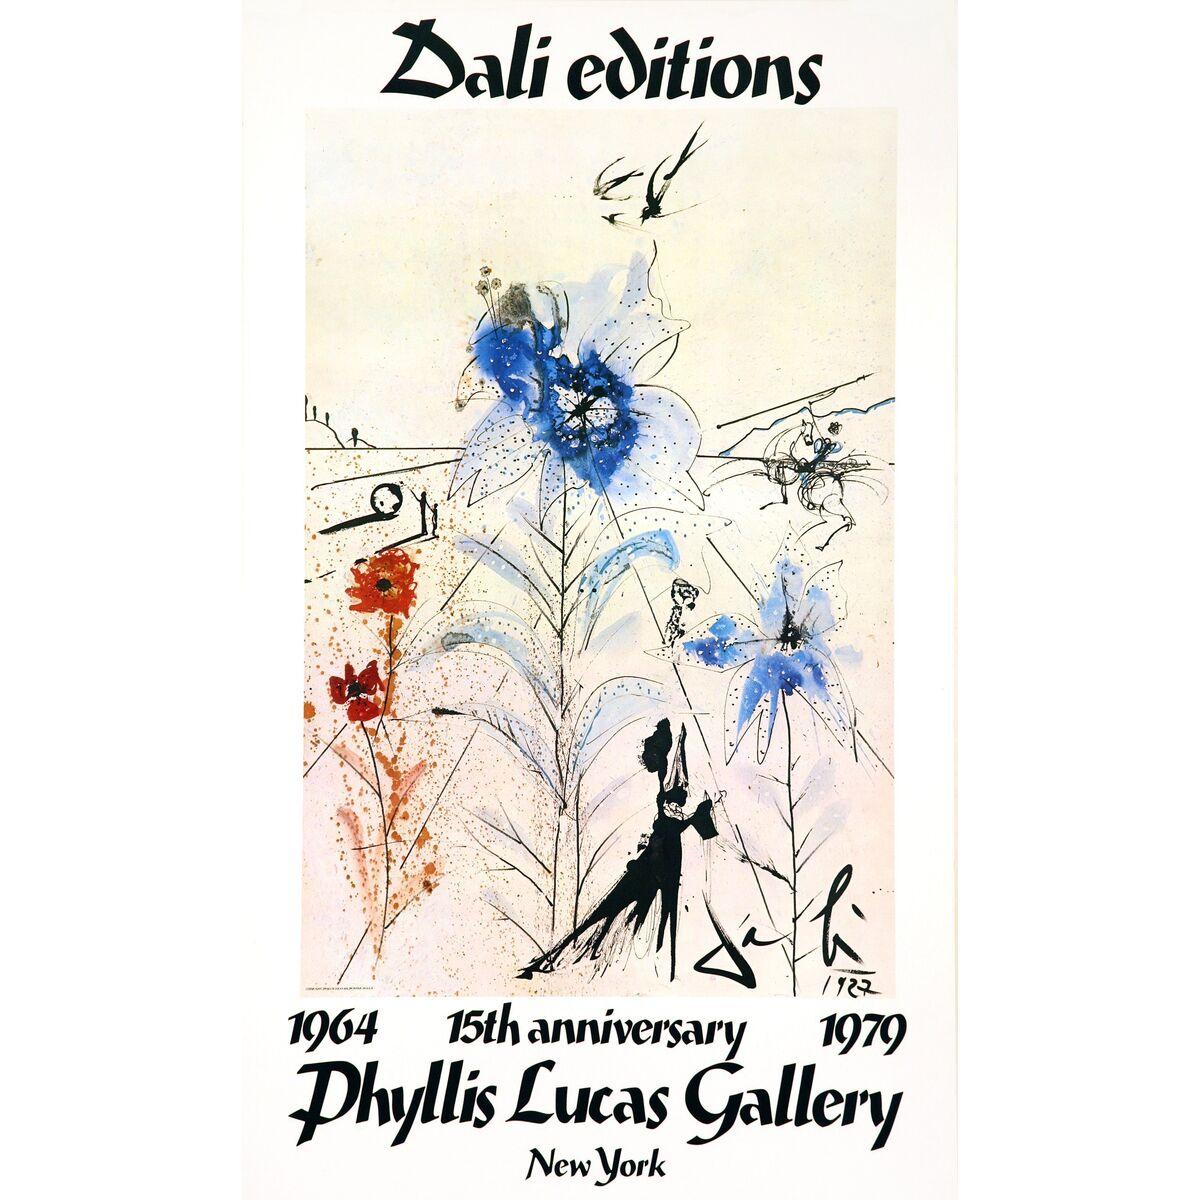 Two Original Lithograph Posters for Dali Editions - Print by Salvador Dalí